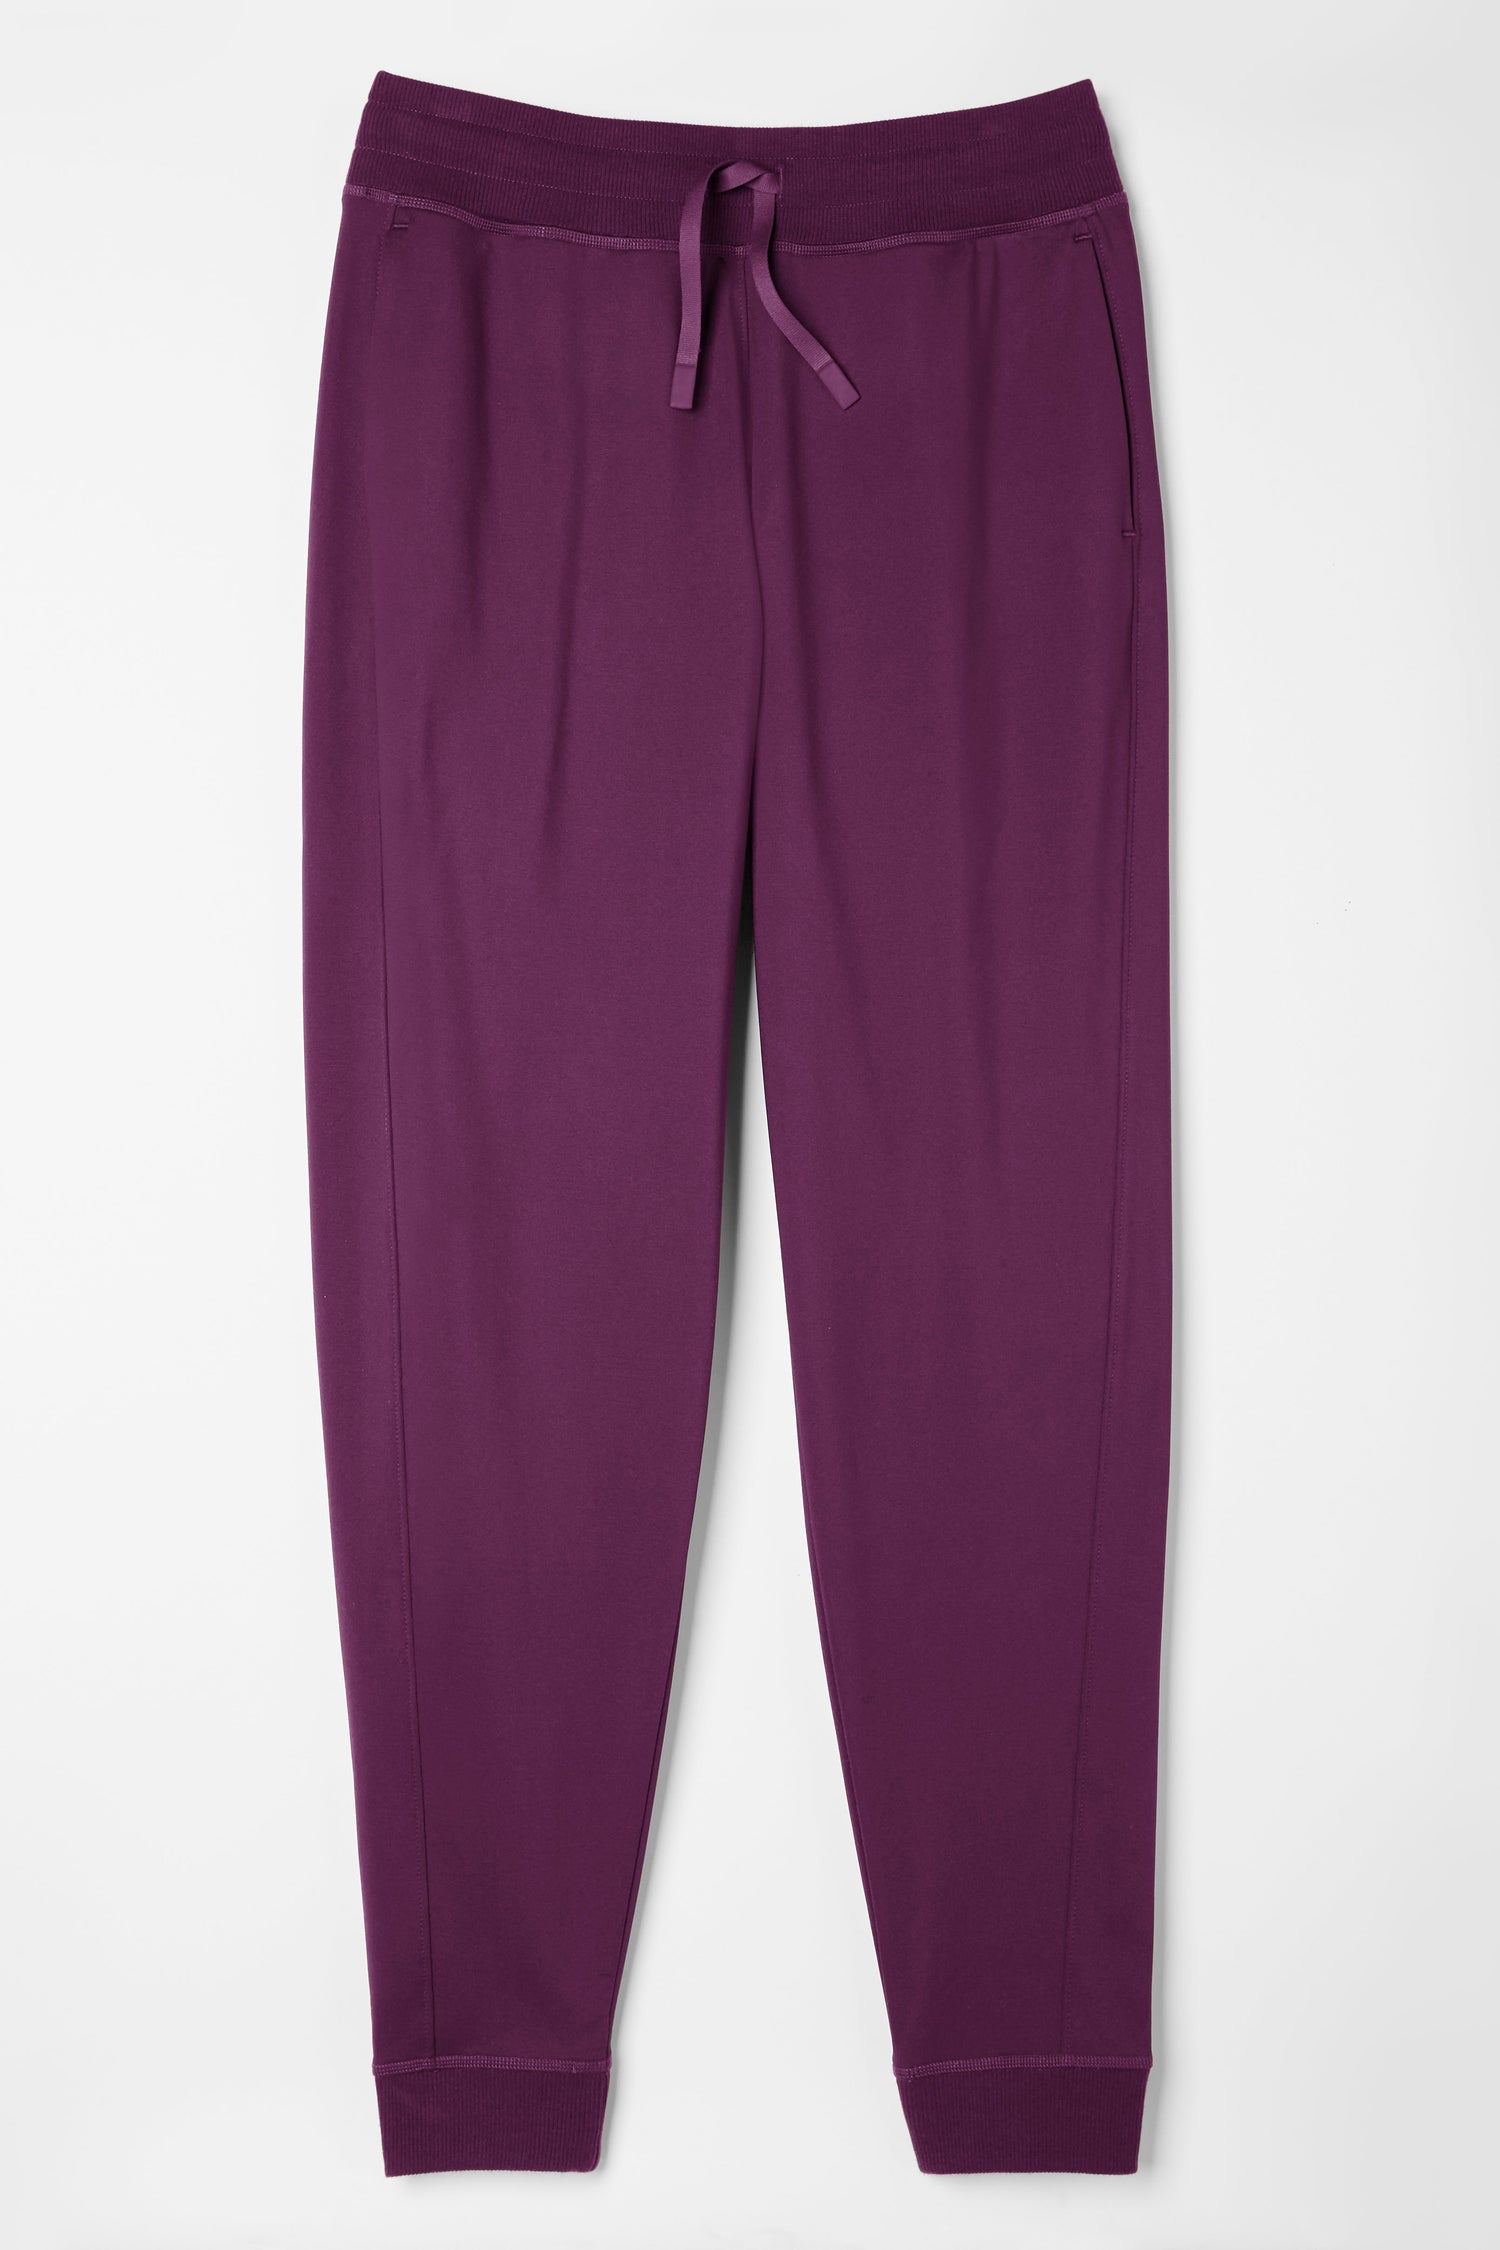 Essentials Womens Maroon Joggers Size XS - beyond exchange